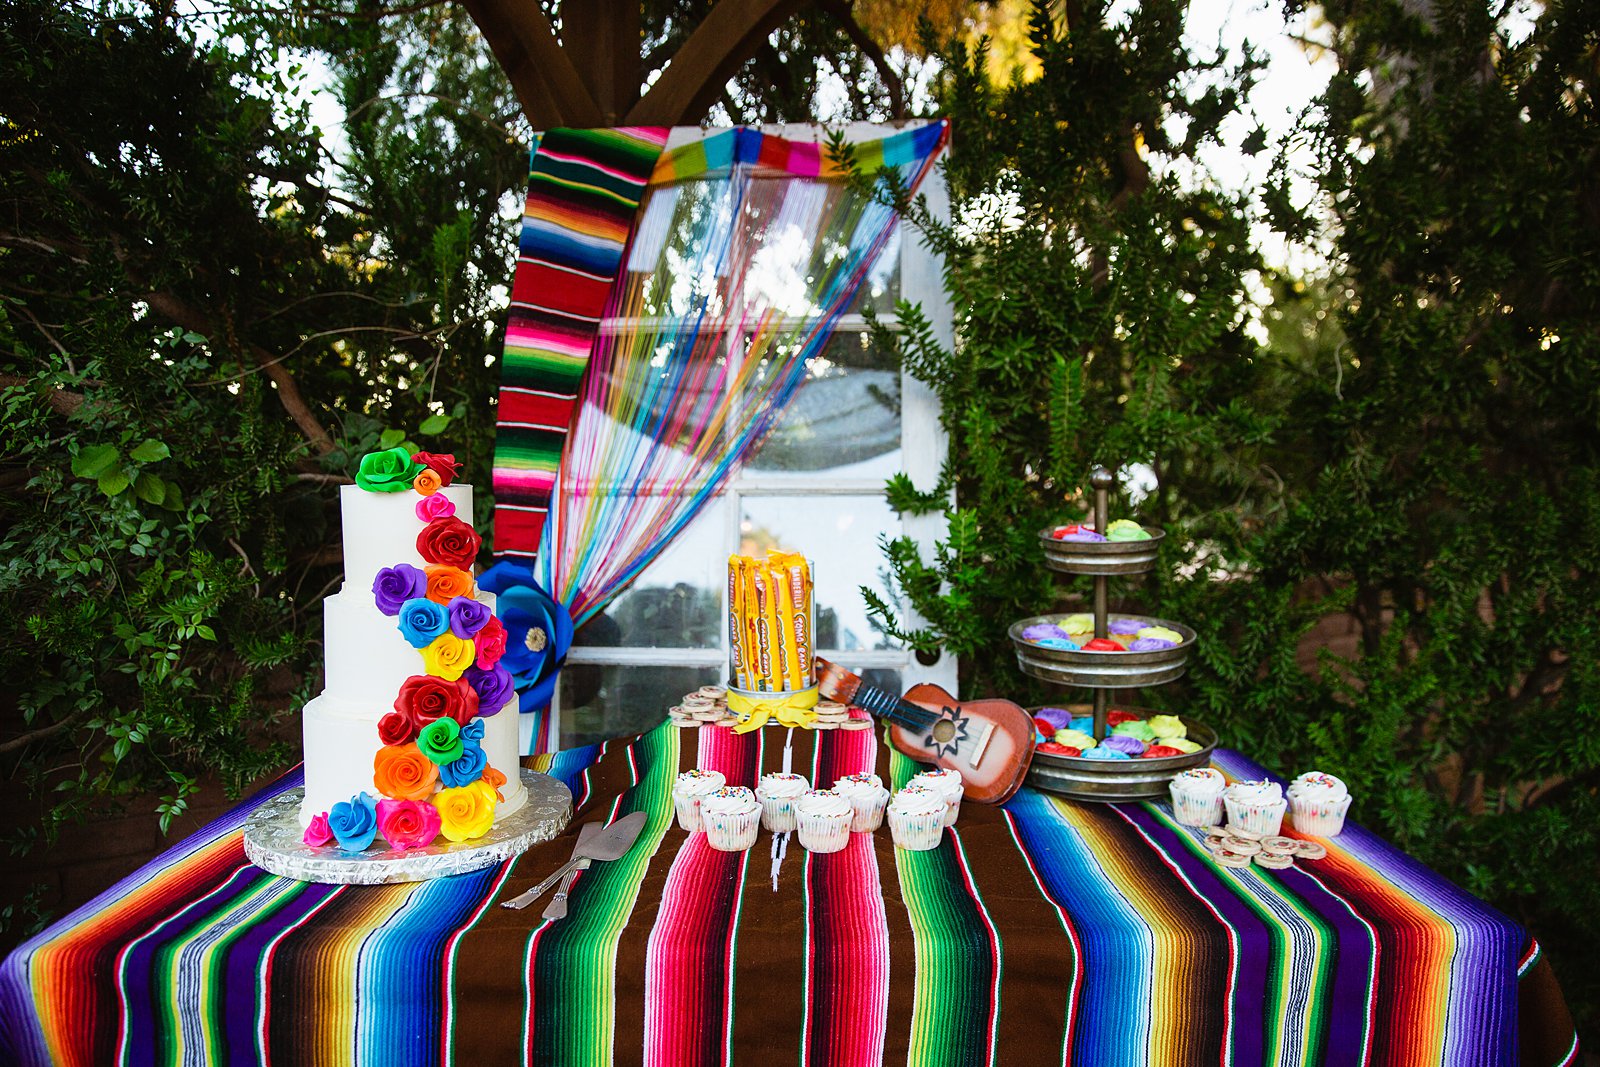 Colorful fiesta cake table at The Farmhouse at Schnepf Farms wedding reception by Arizona wedding photographer PMA Photography.